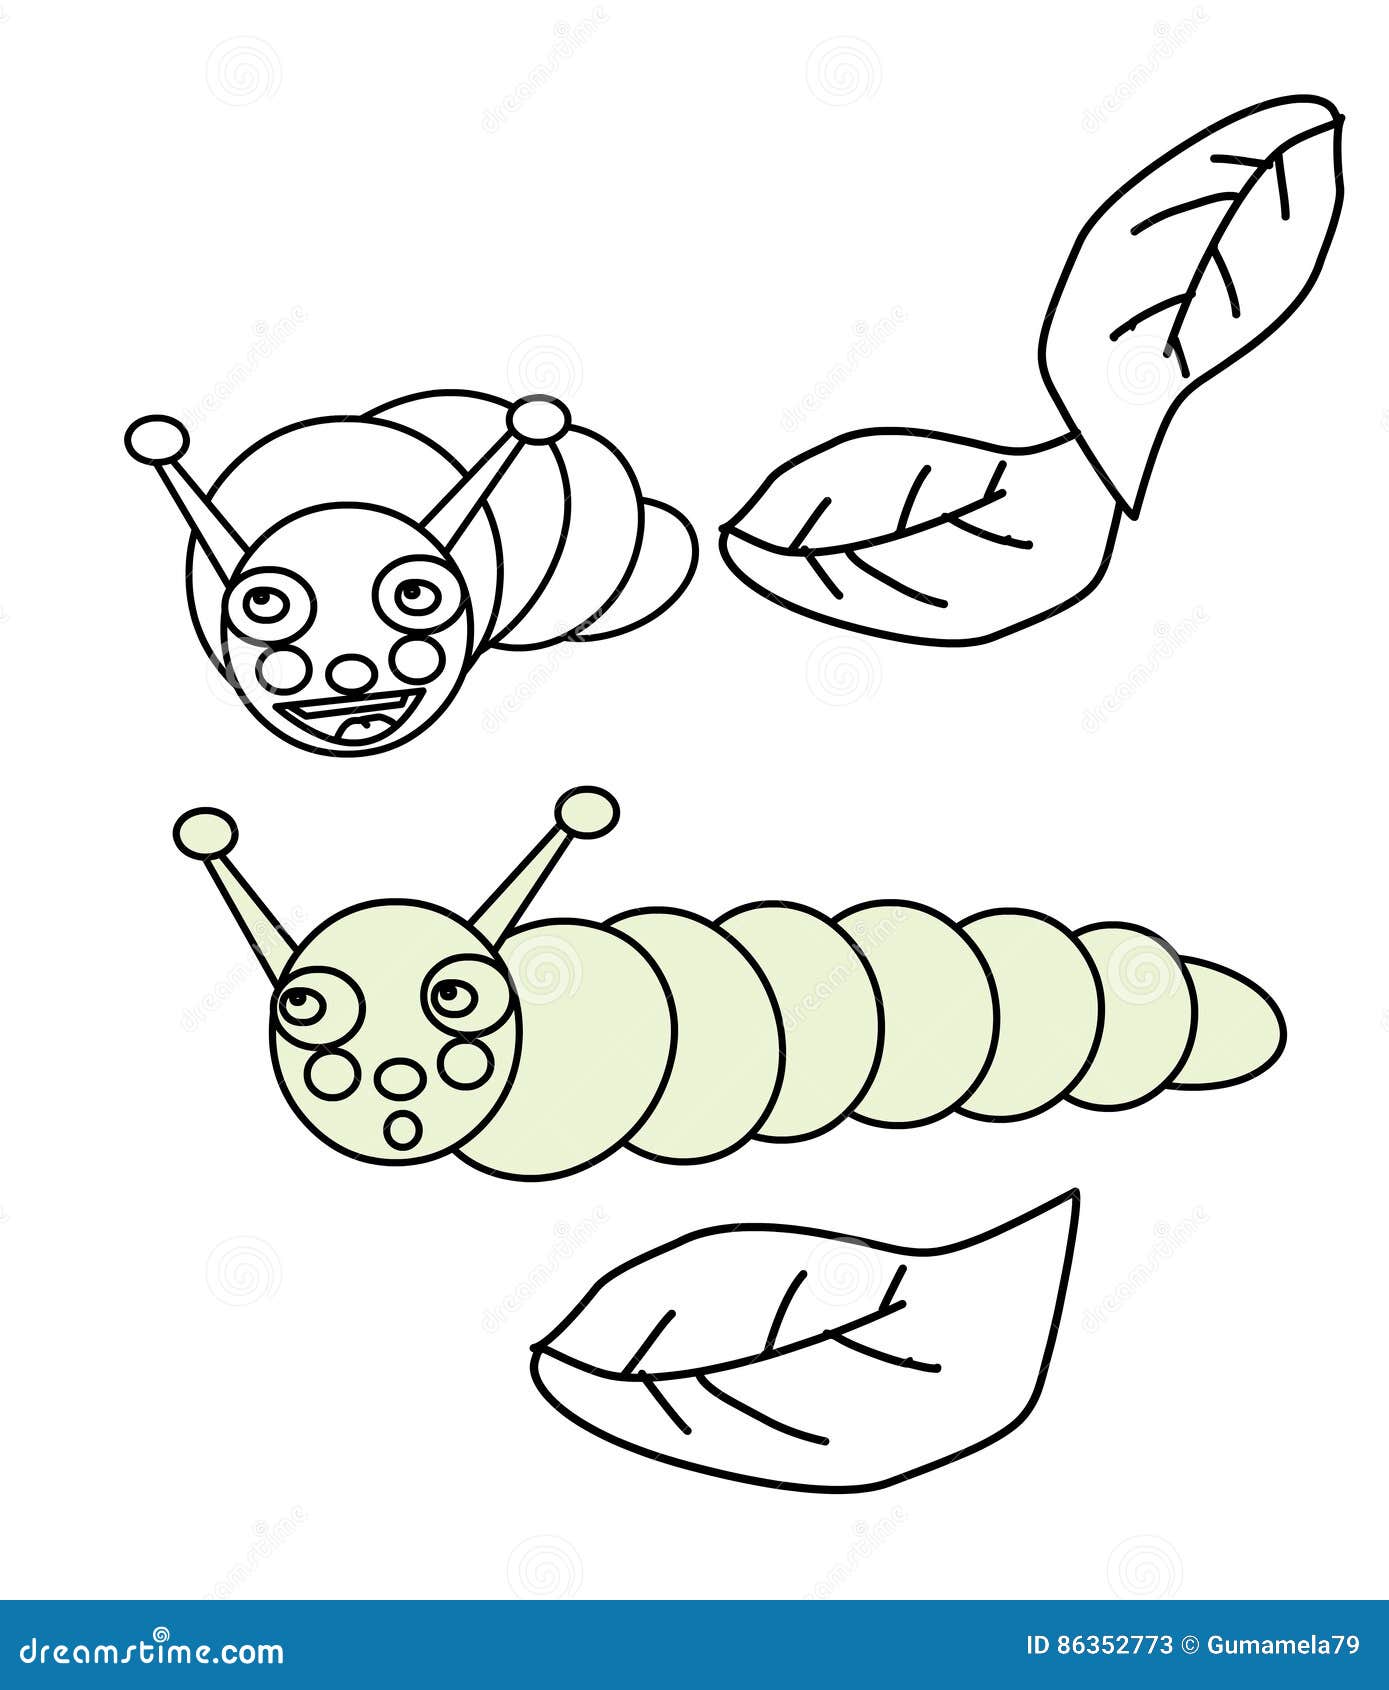 Caterpillar coloring page stock illustration. Illustration of draw